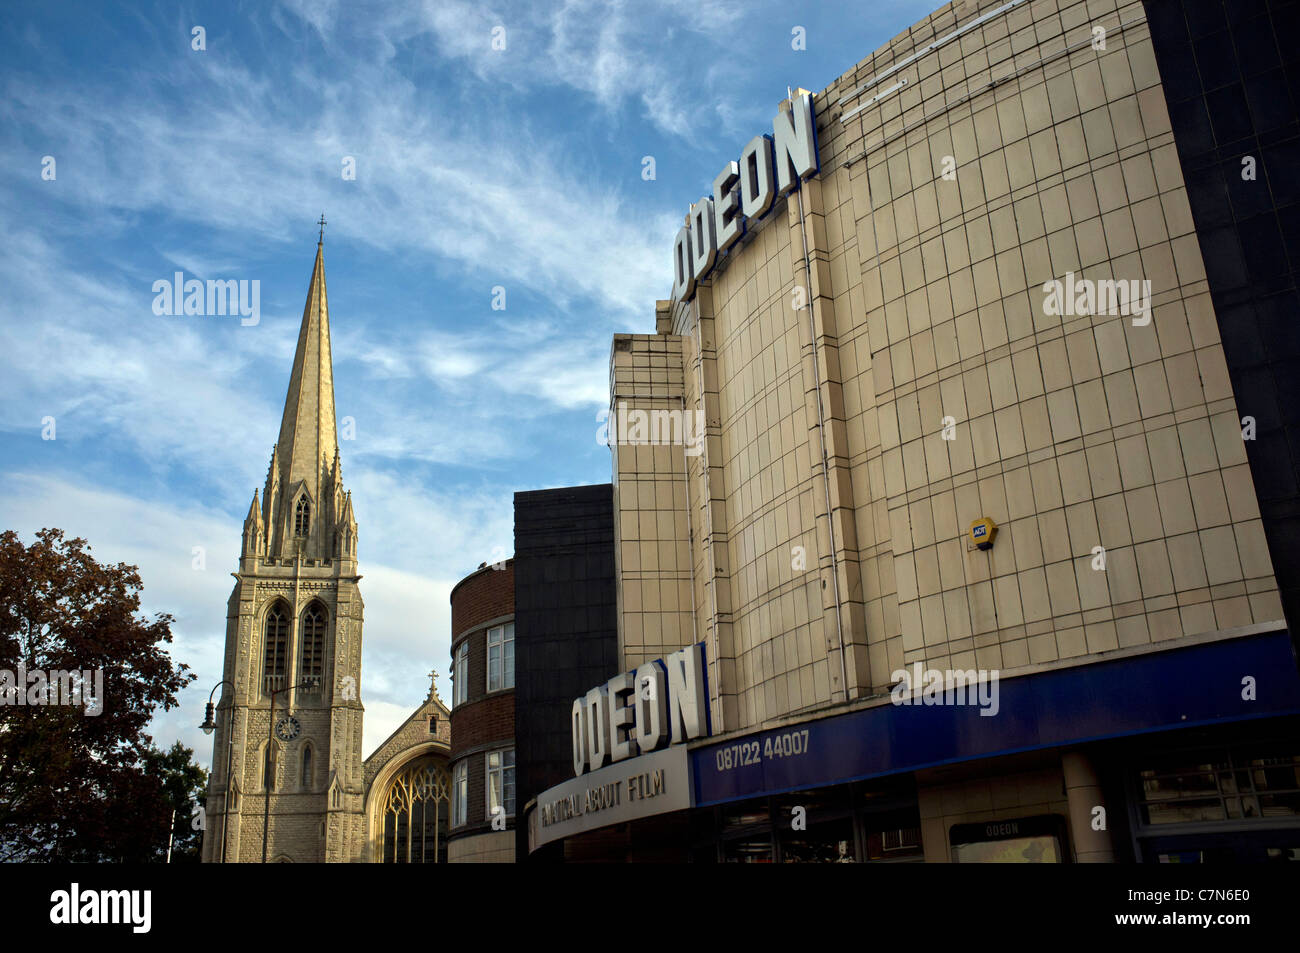 St James’s Church and Odeon Cinema, Muswell Hill London Stock Photo